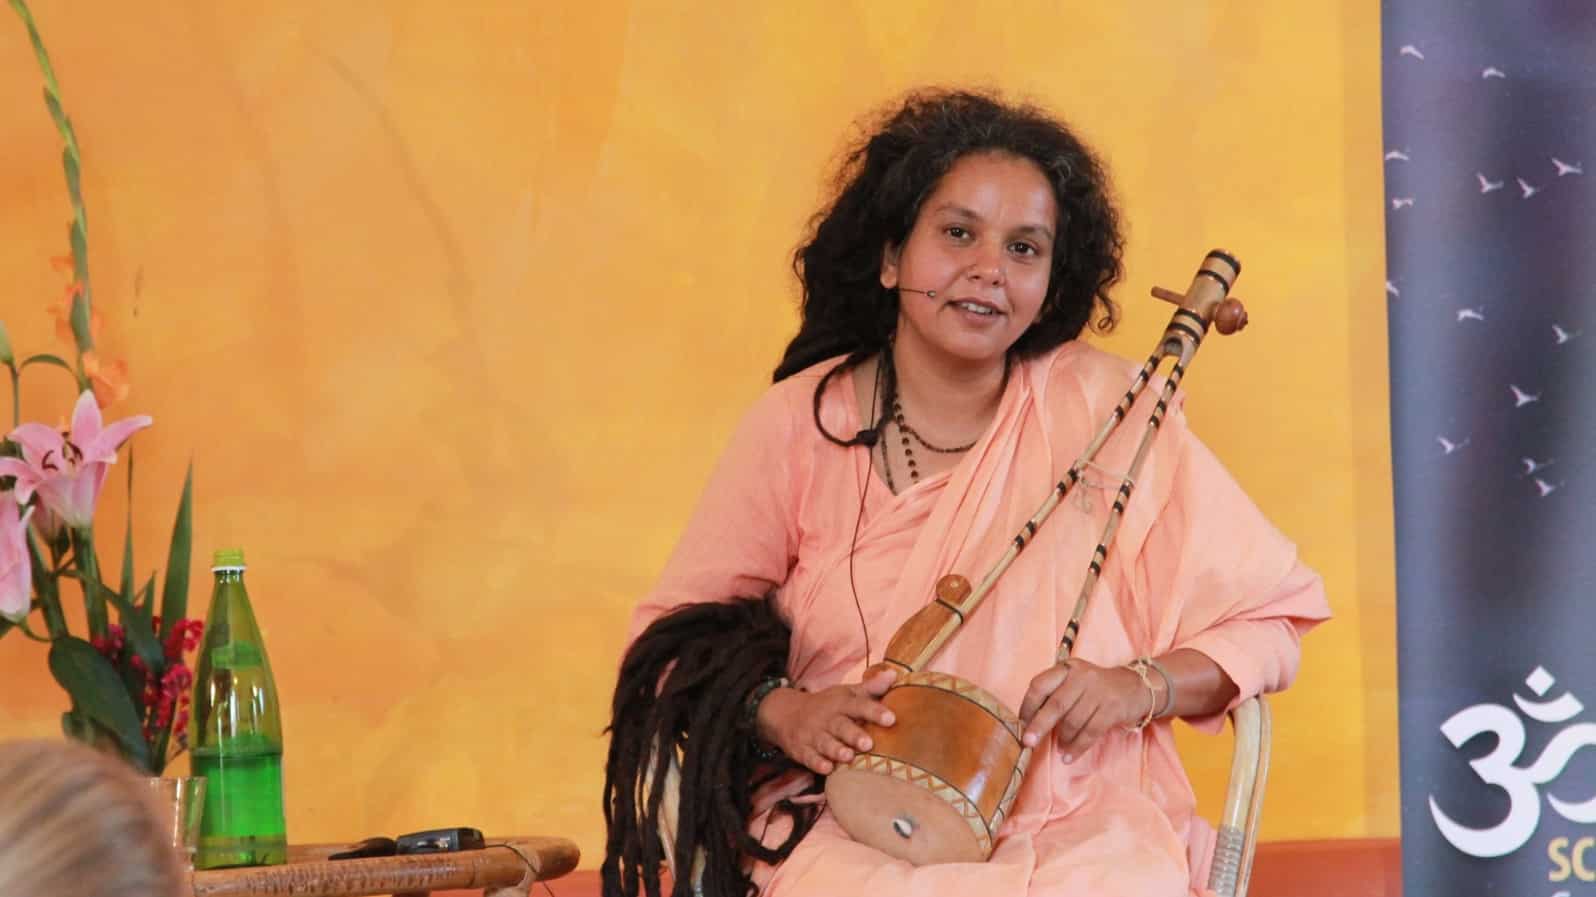 World Music Day: Documentary on Parvathy Baul’s journey drops on YouTube